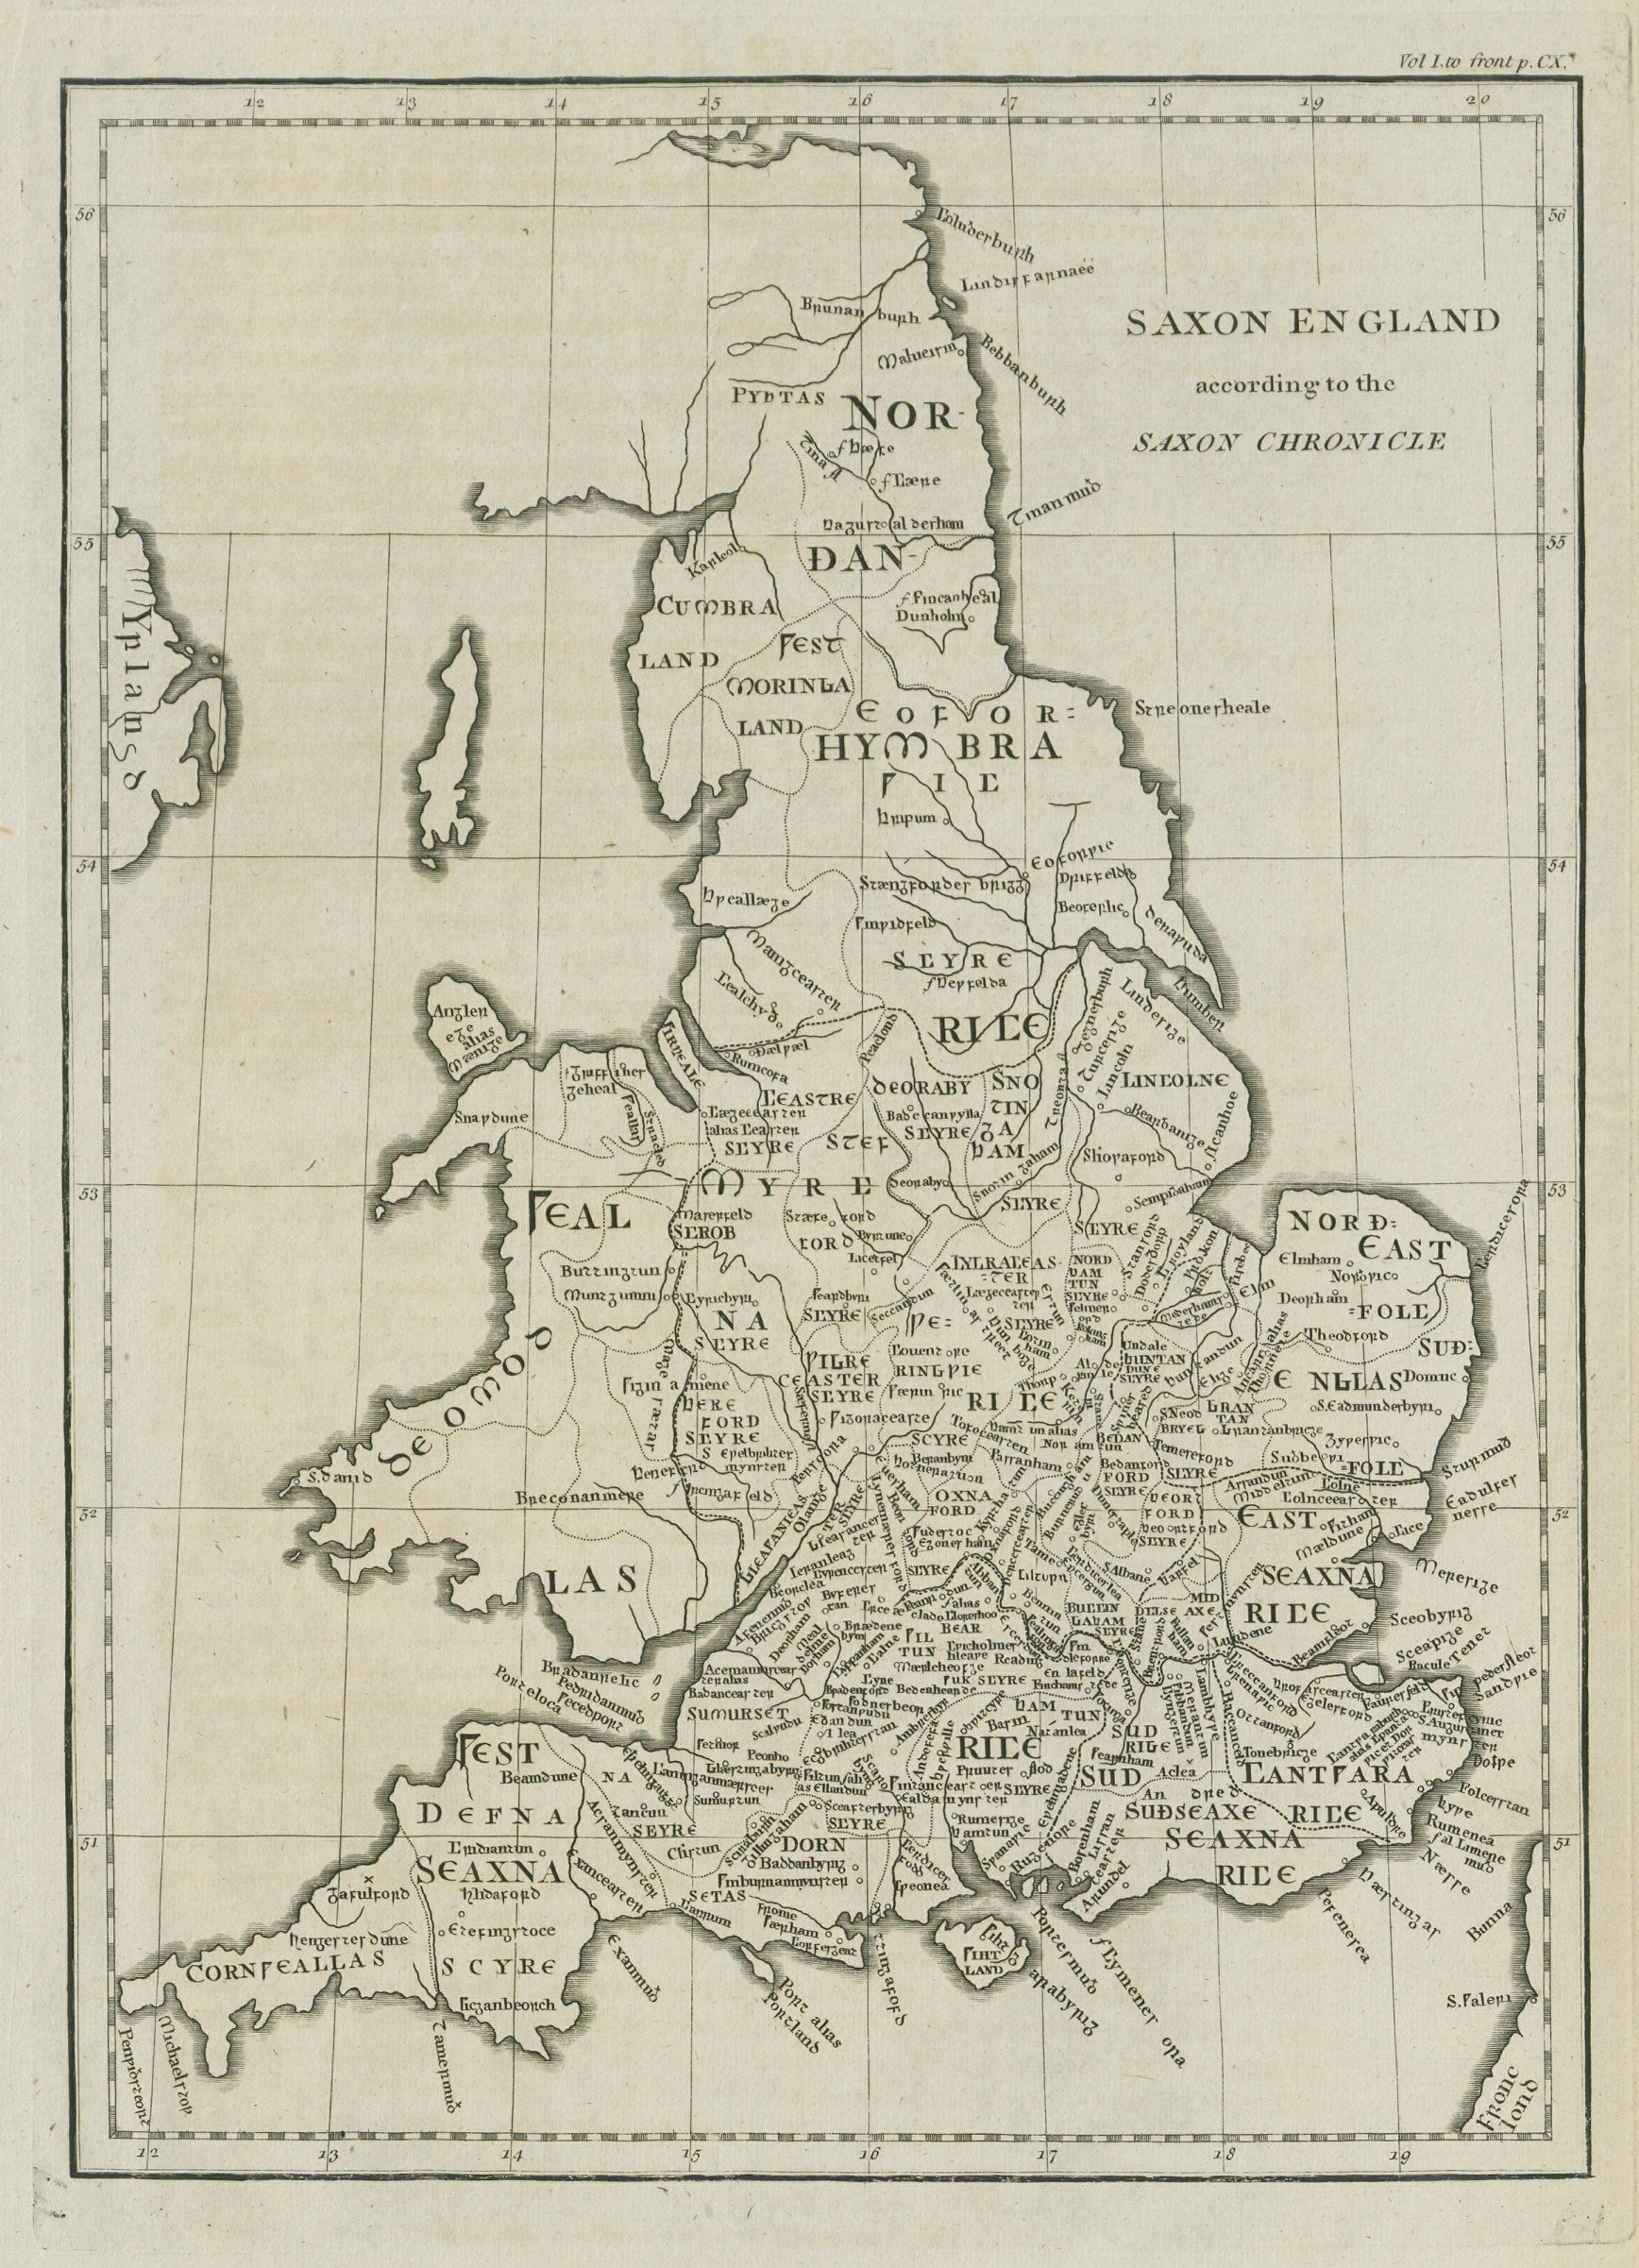 Associate Product "Saxon England according to the Saxon Chronicle", by John CARY 1789 old map